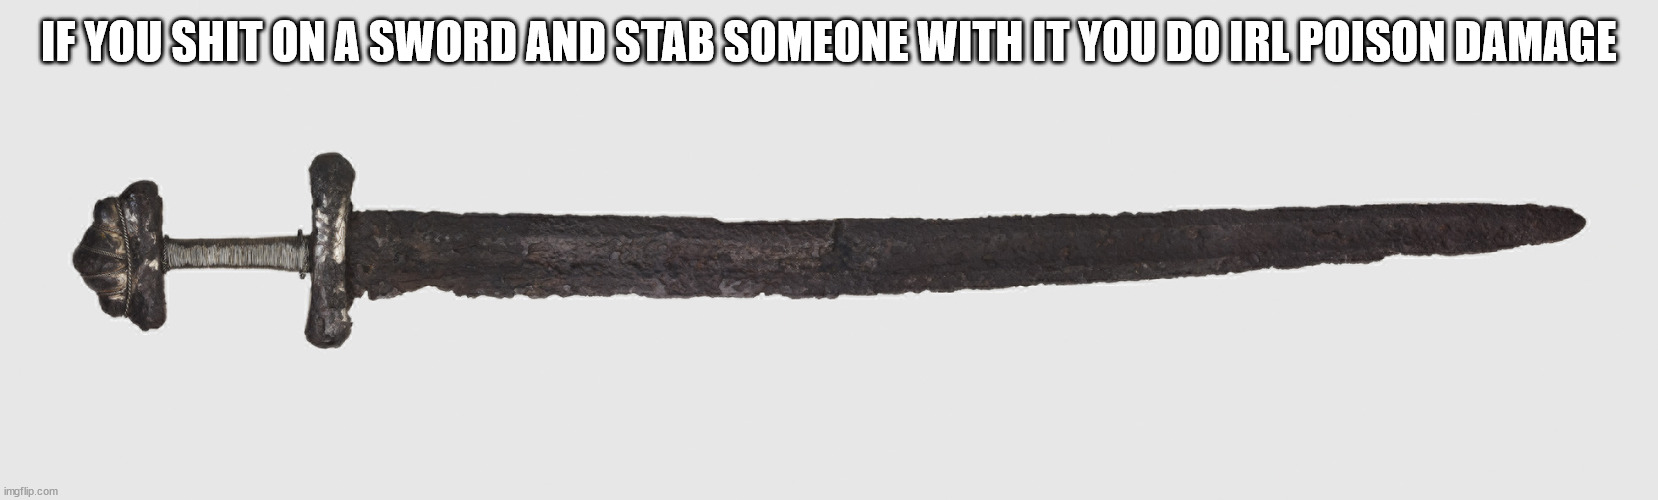 dagger - If You Shit On A Sword And Stab Someone With It You Do Irl Poison Damage imgflip.com